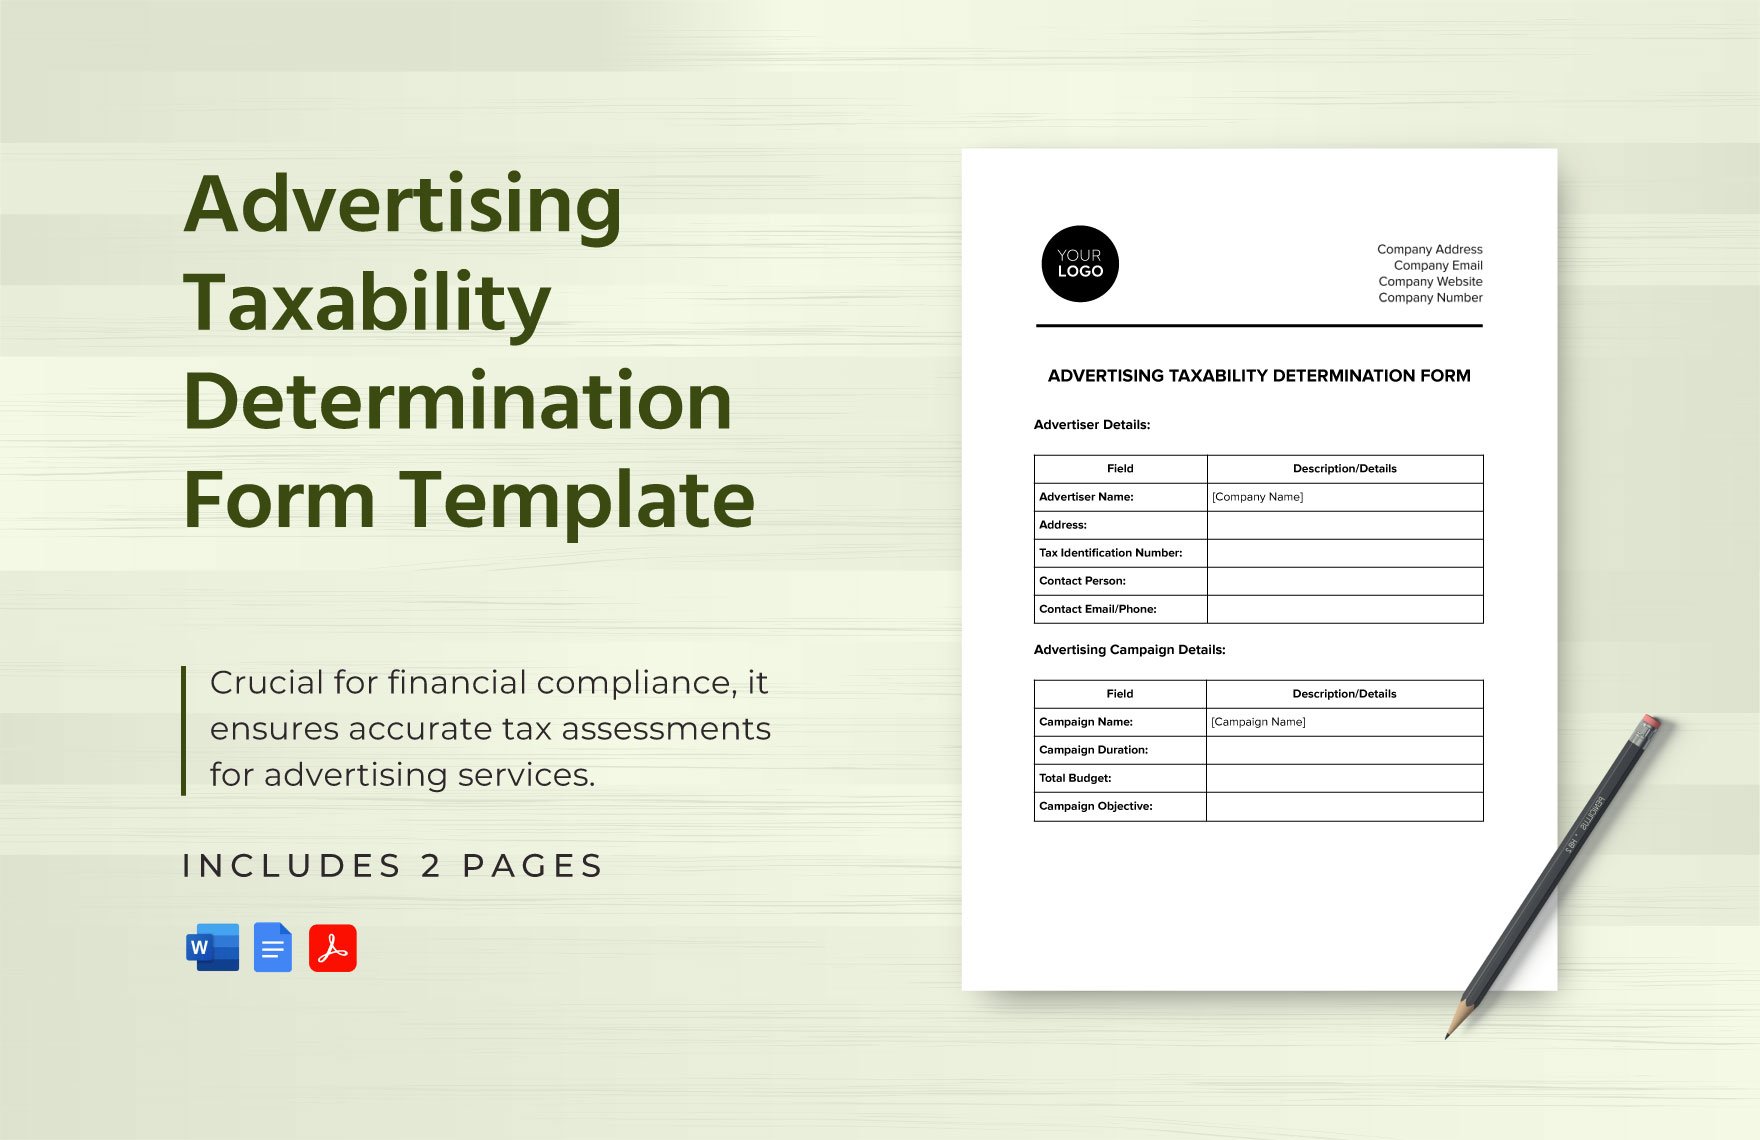 Advertising Taxability Determination Form Template in Word, Google Docs, PDF